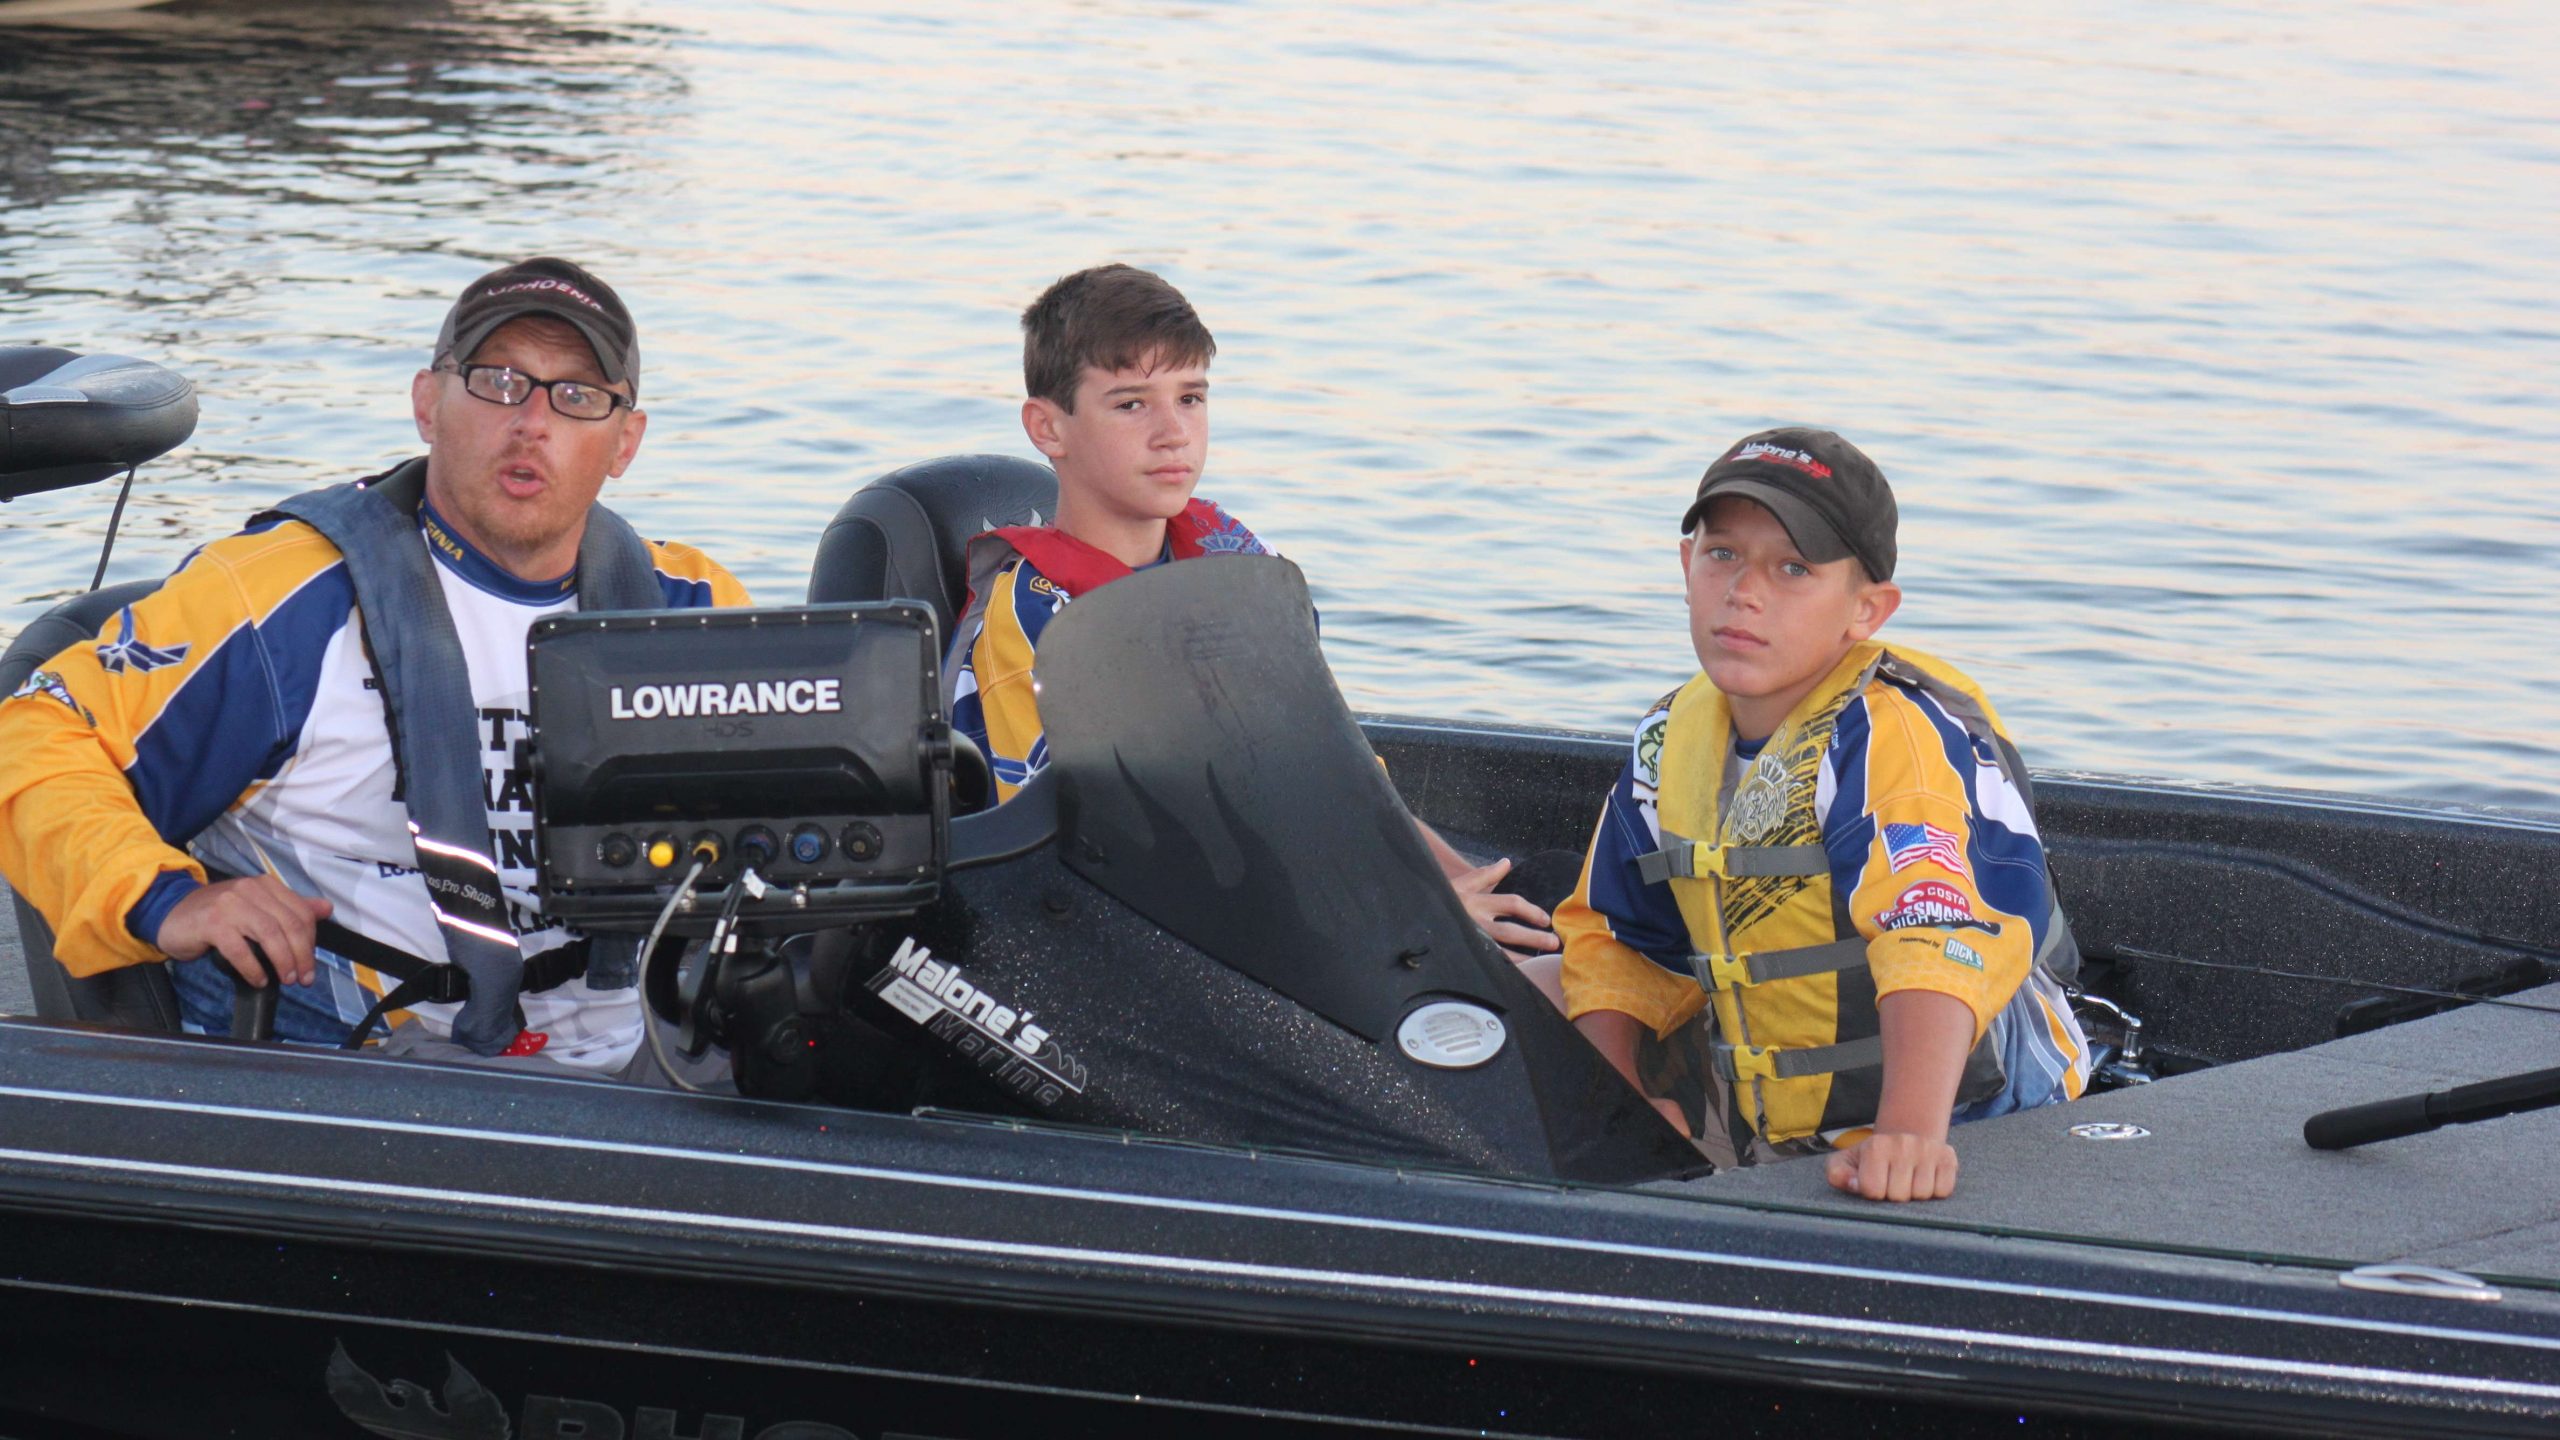 And there's Boat No. 2 with Logan Powell and Cameron Irizarry of West Virginia idling up to the dock. 